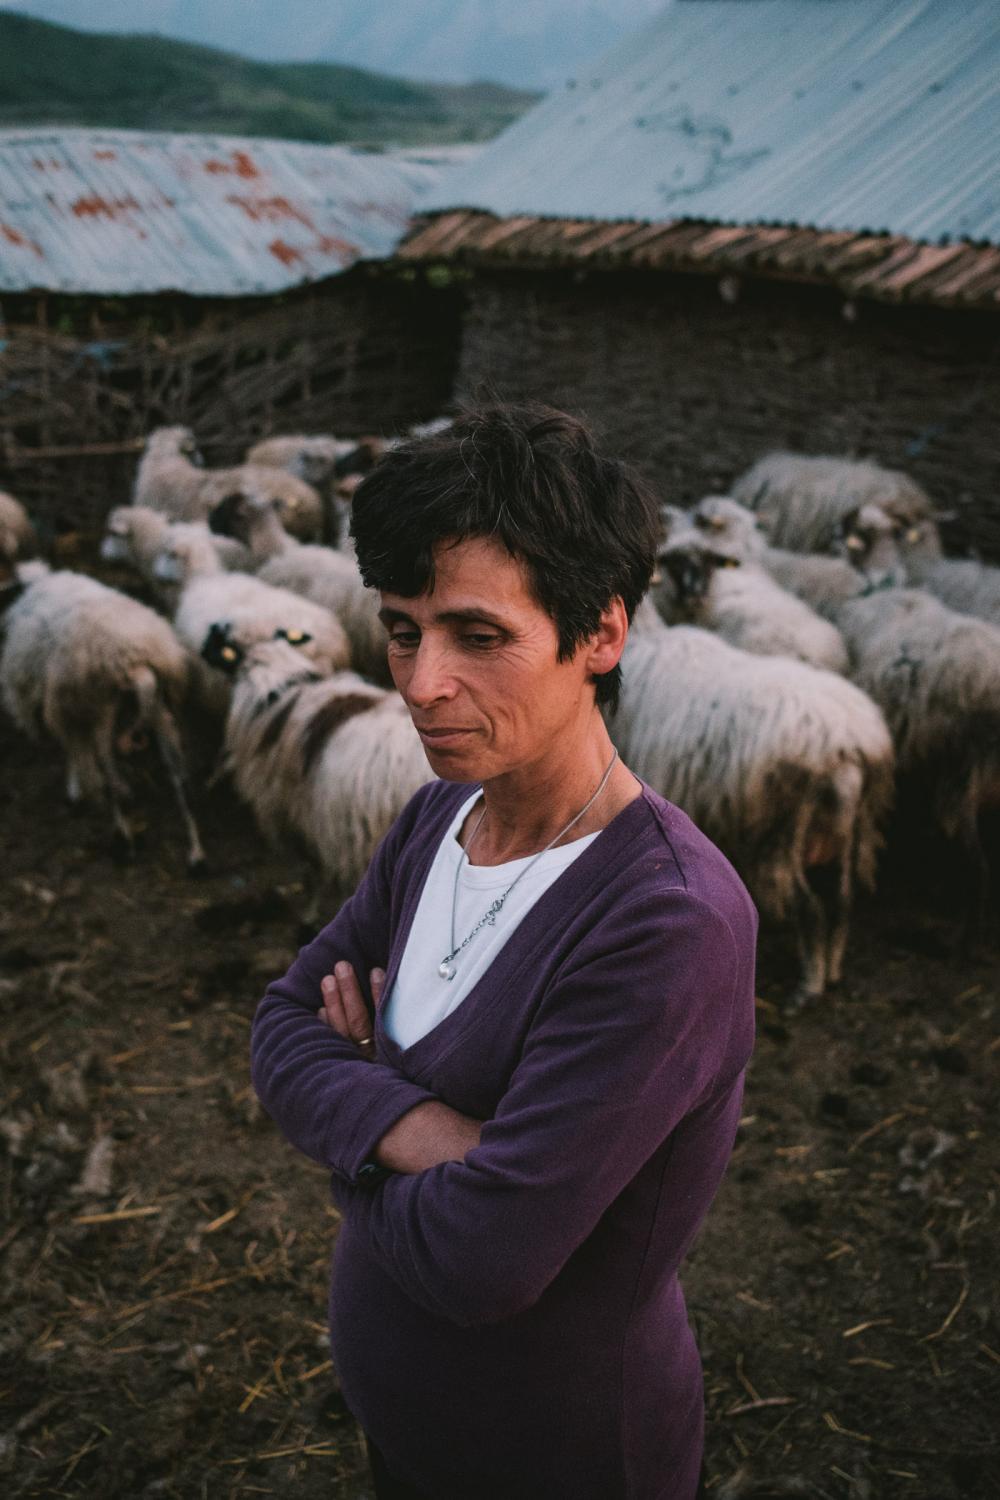 Ylli and her family raise sheep and grow crops on their land below the village of Kuta. The proposed construction of nearby dams would create a large reservoir, flooding most of the fertile land in the surrounding areas. With few non-agricultural jobs in the area, most of the remaining people in Kuta would most likely be forced to relocate.